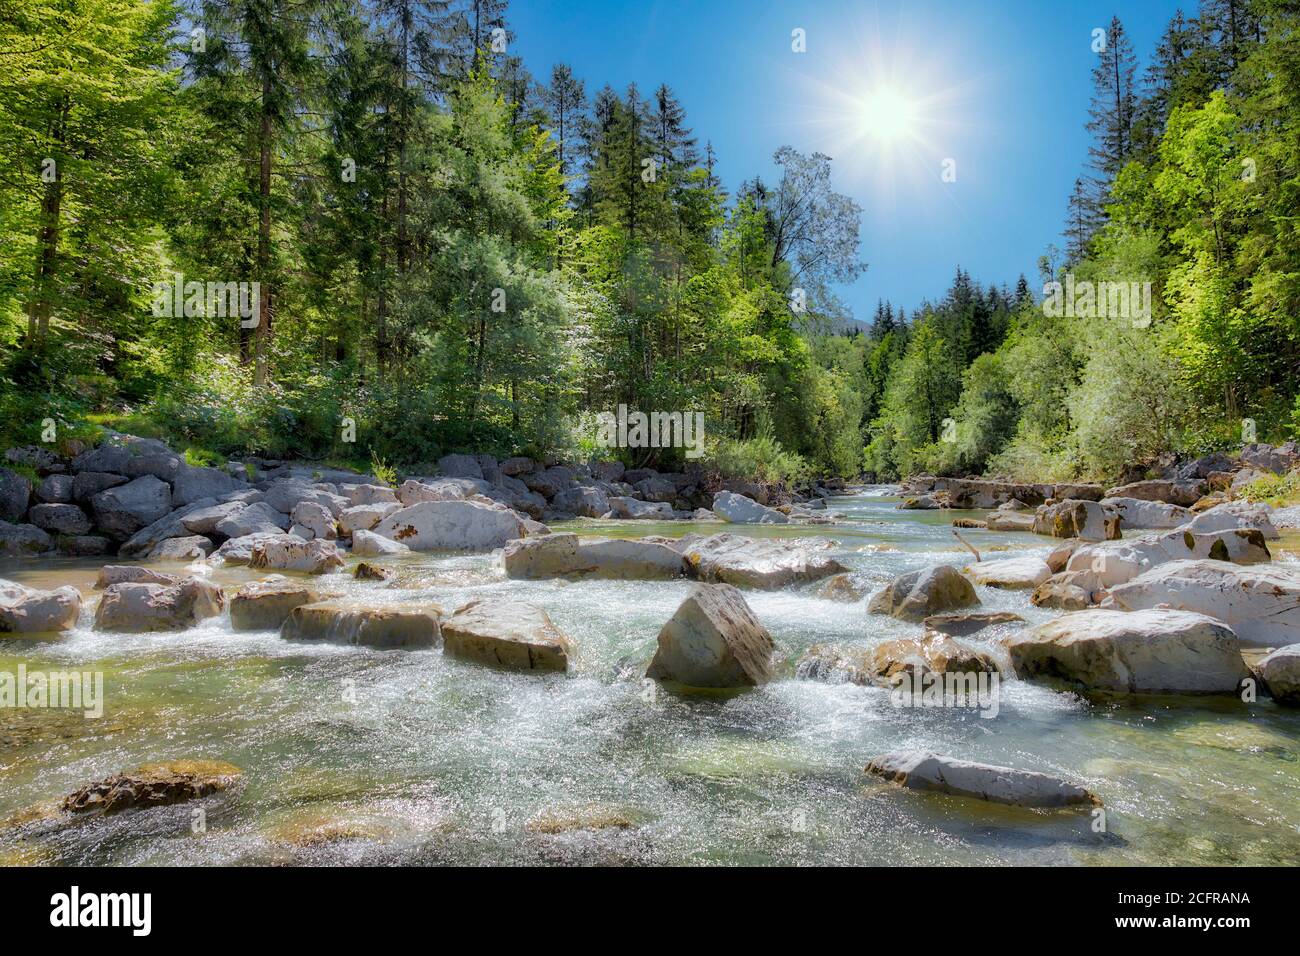 DE - BAVARIA: Fiume Weissach a Wildbad Kreuth (HDR-Image) Foto Stock